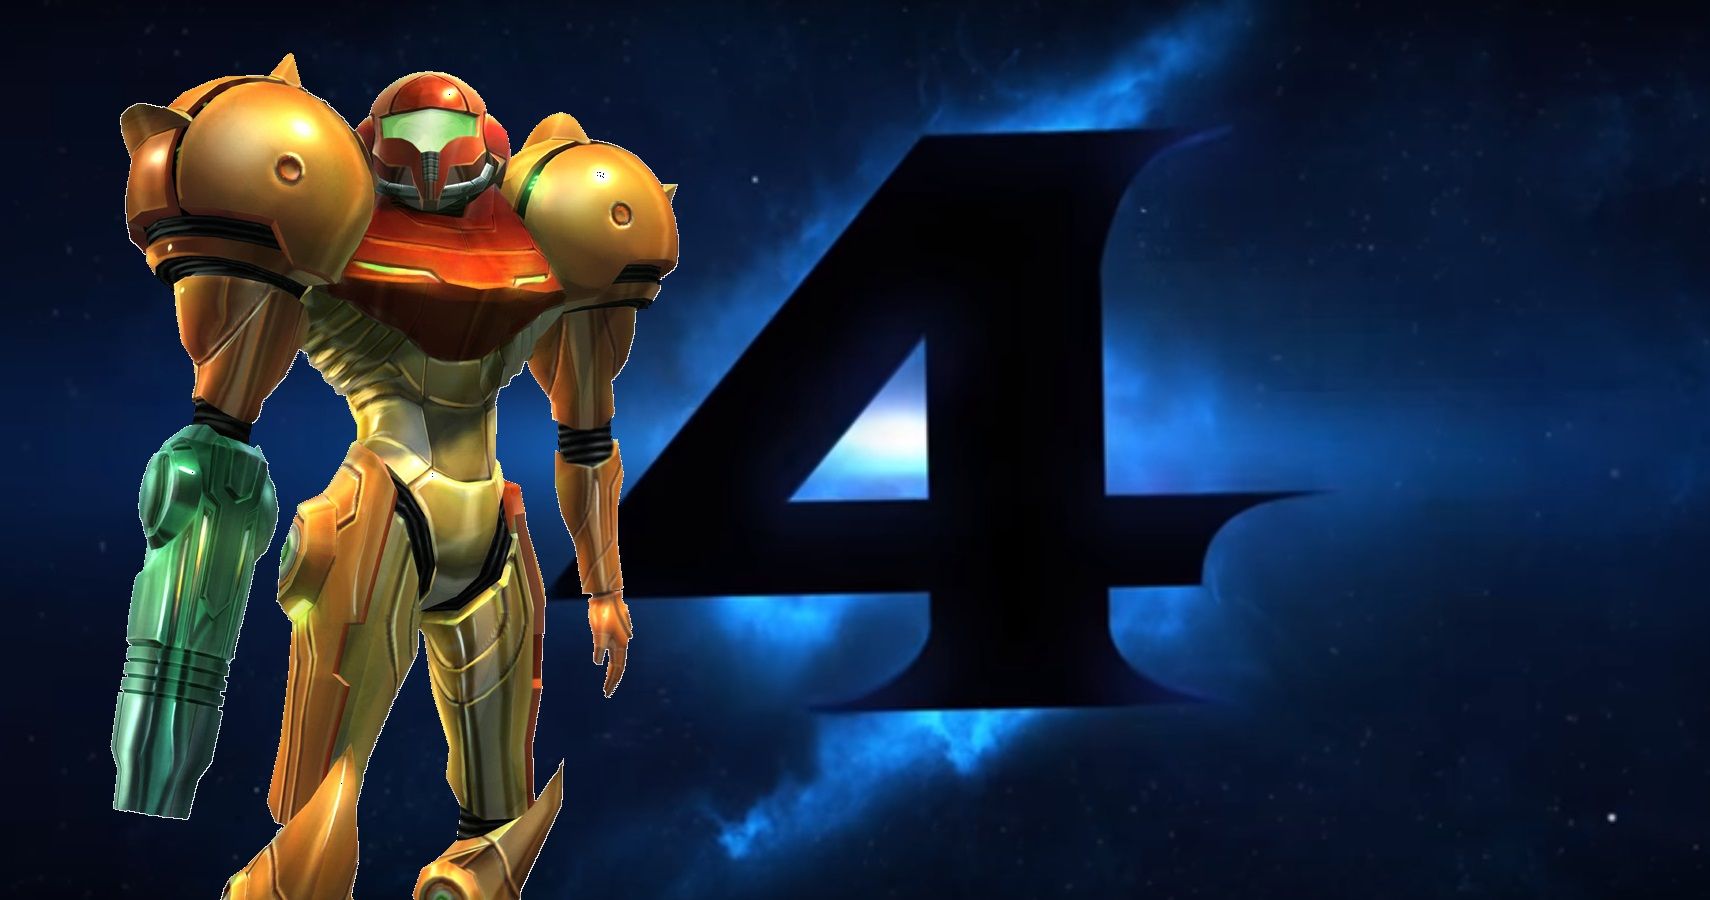 metroid prime 4 cancelled